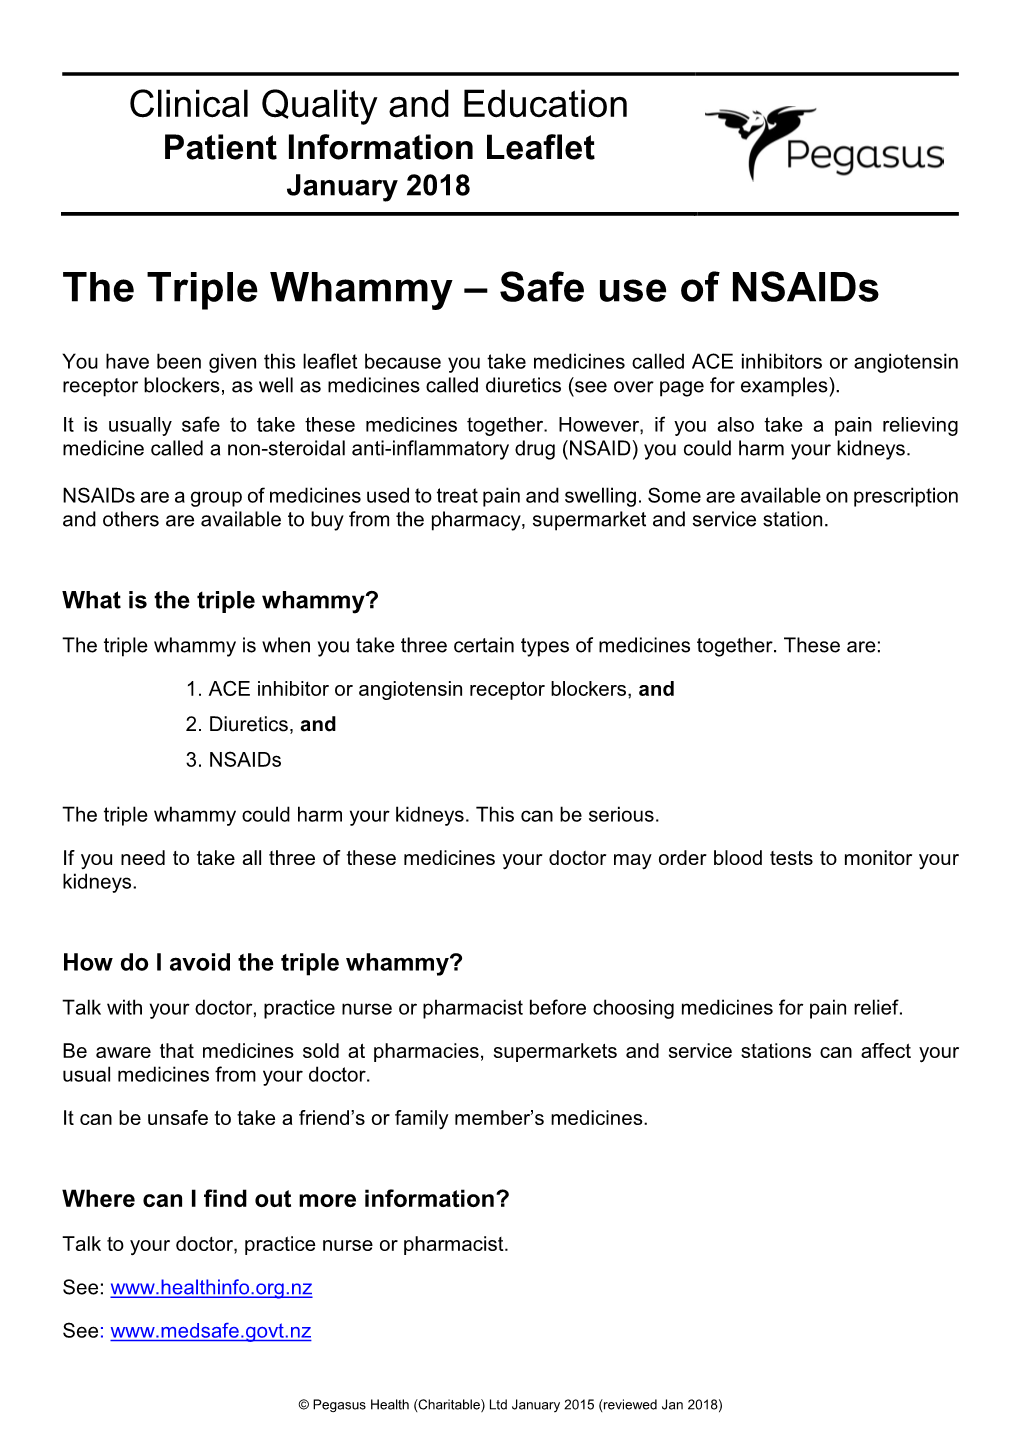 The Triple Whammy Safe Use of Nsaids DocsLib